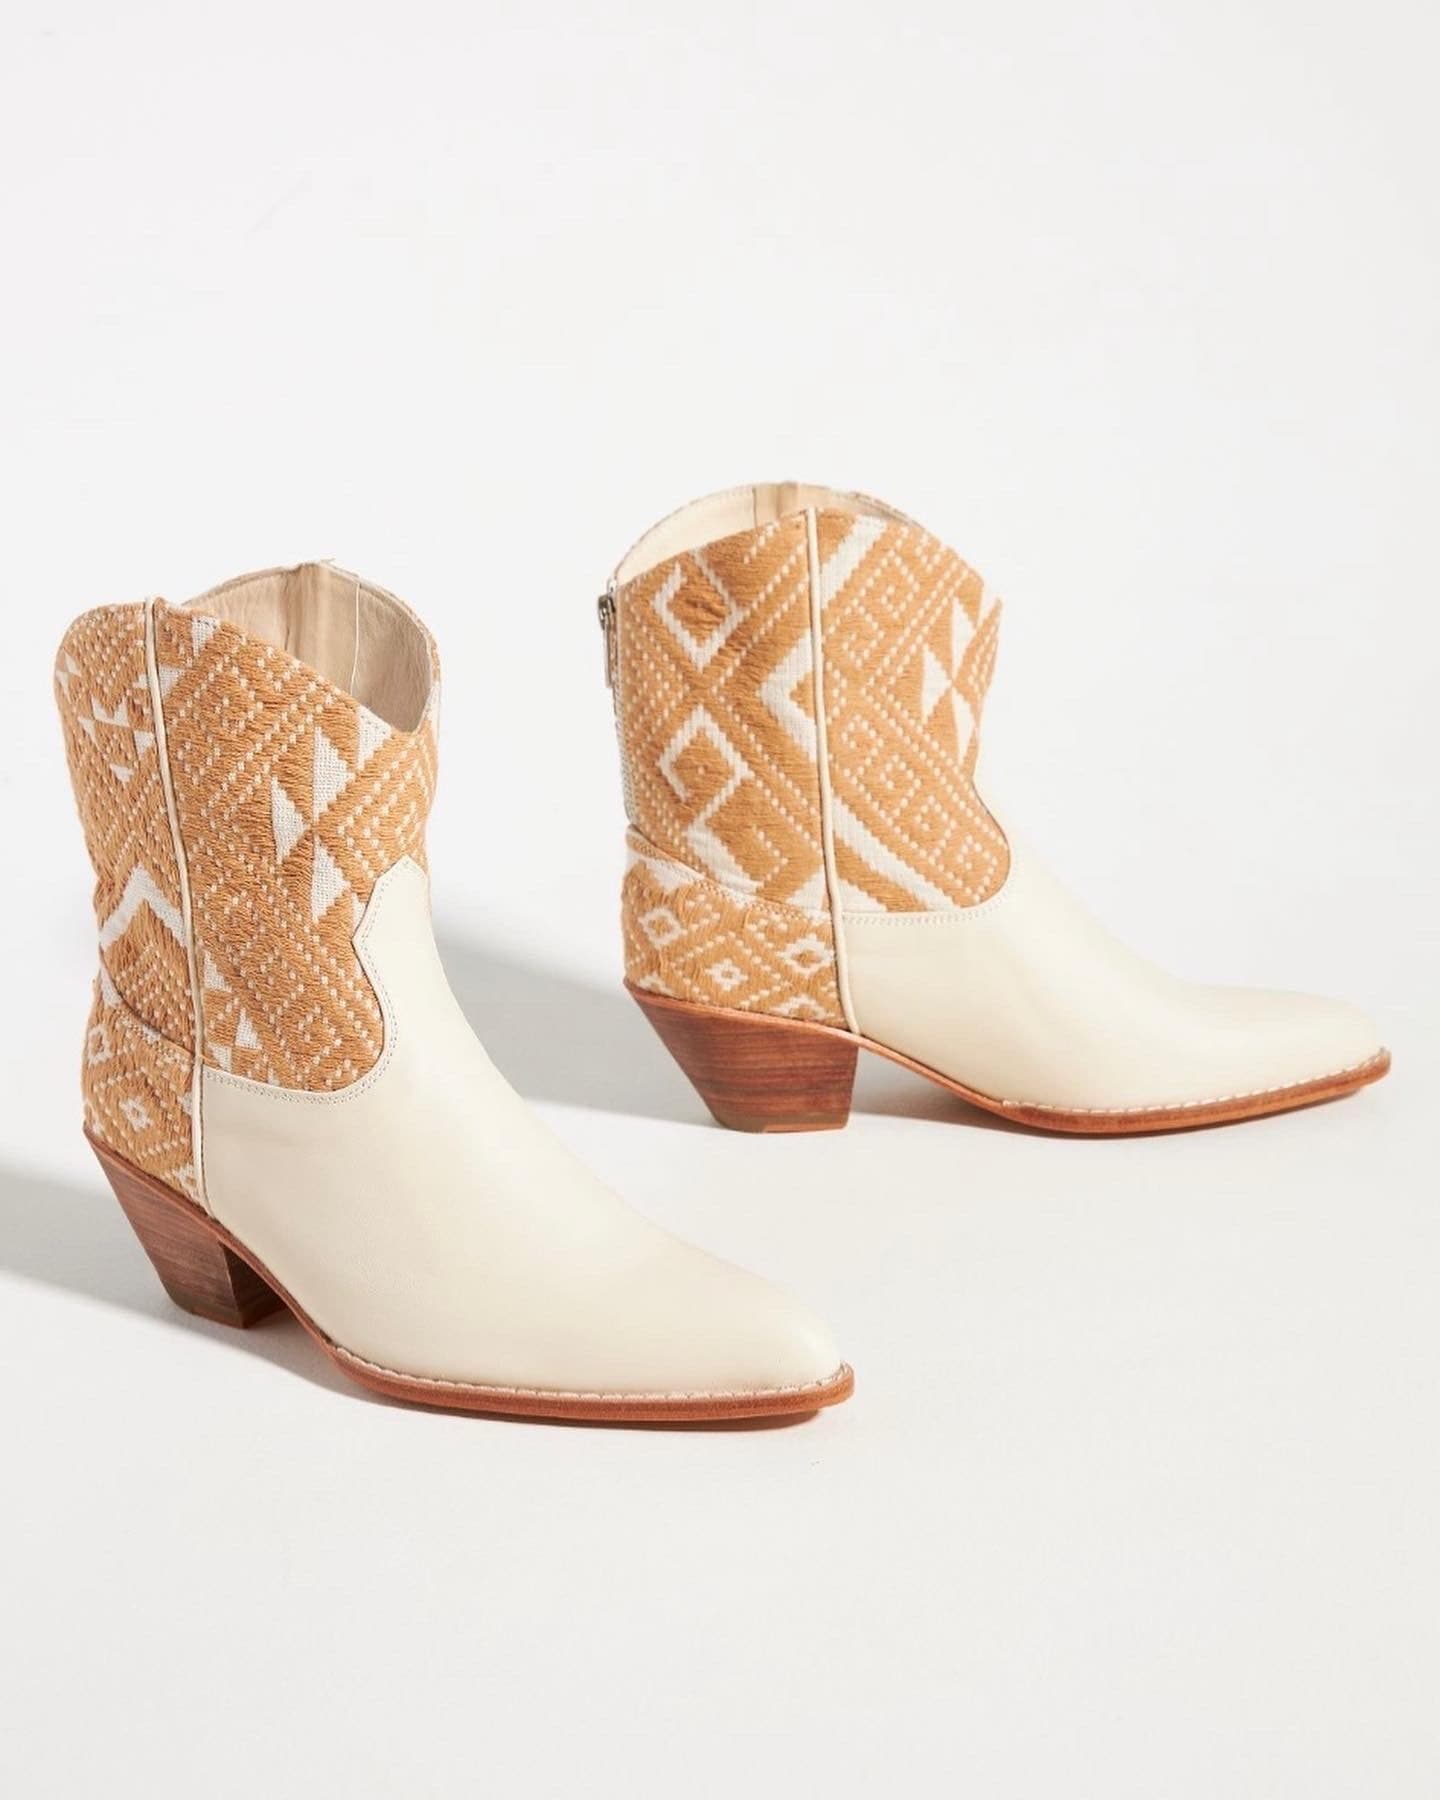 IVORY HAND WOVEN WESTERN BOOTS X ANTHROPOLOGIE - sustainably made MOMO NEW YORK sustainable clothing, boots slow fashion